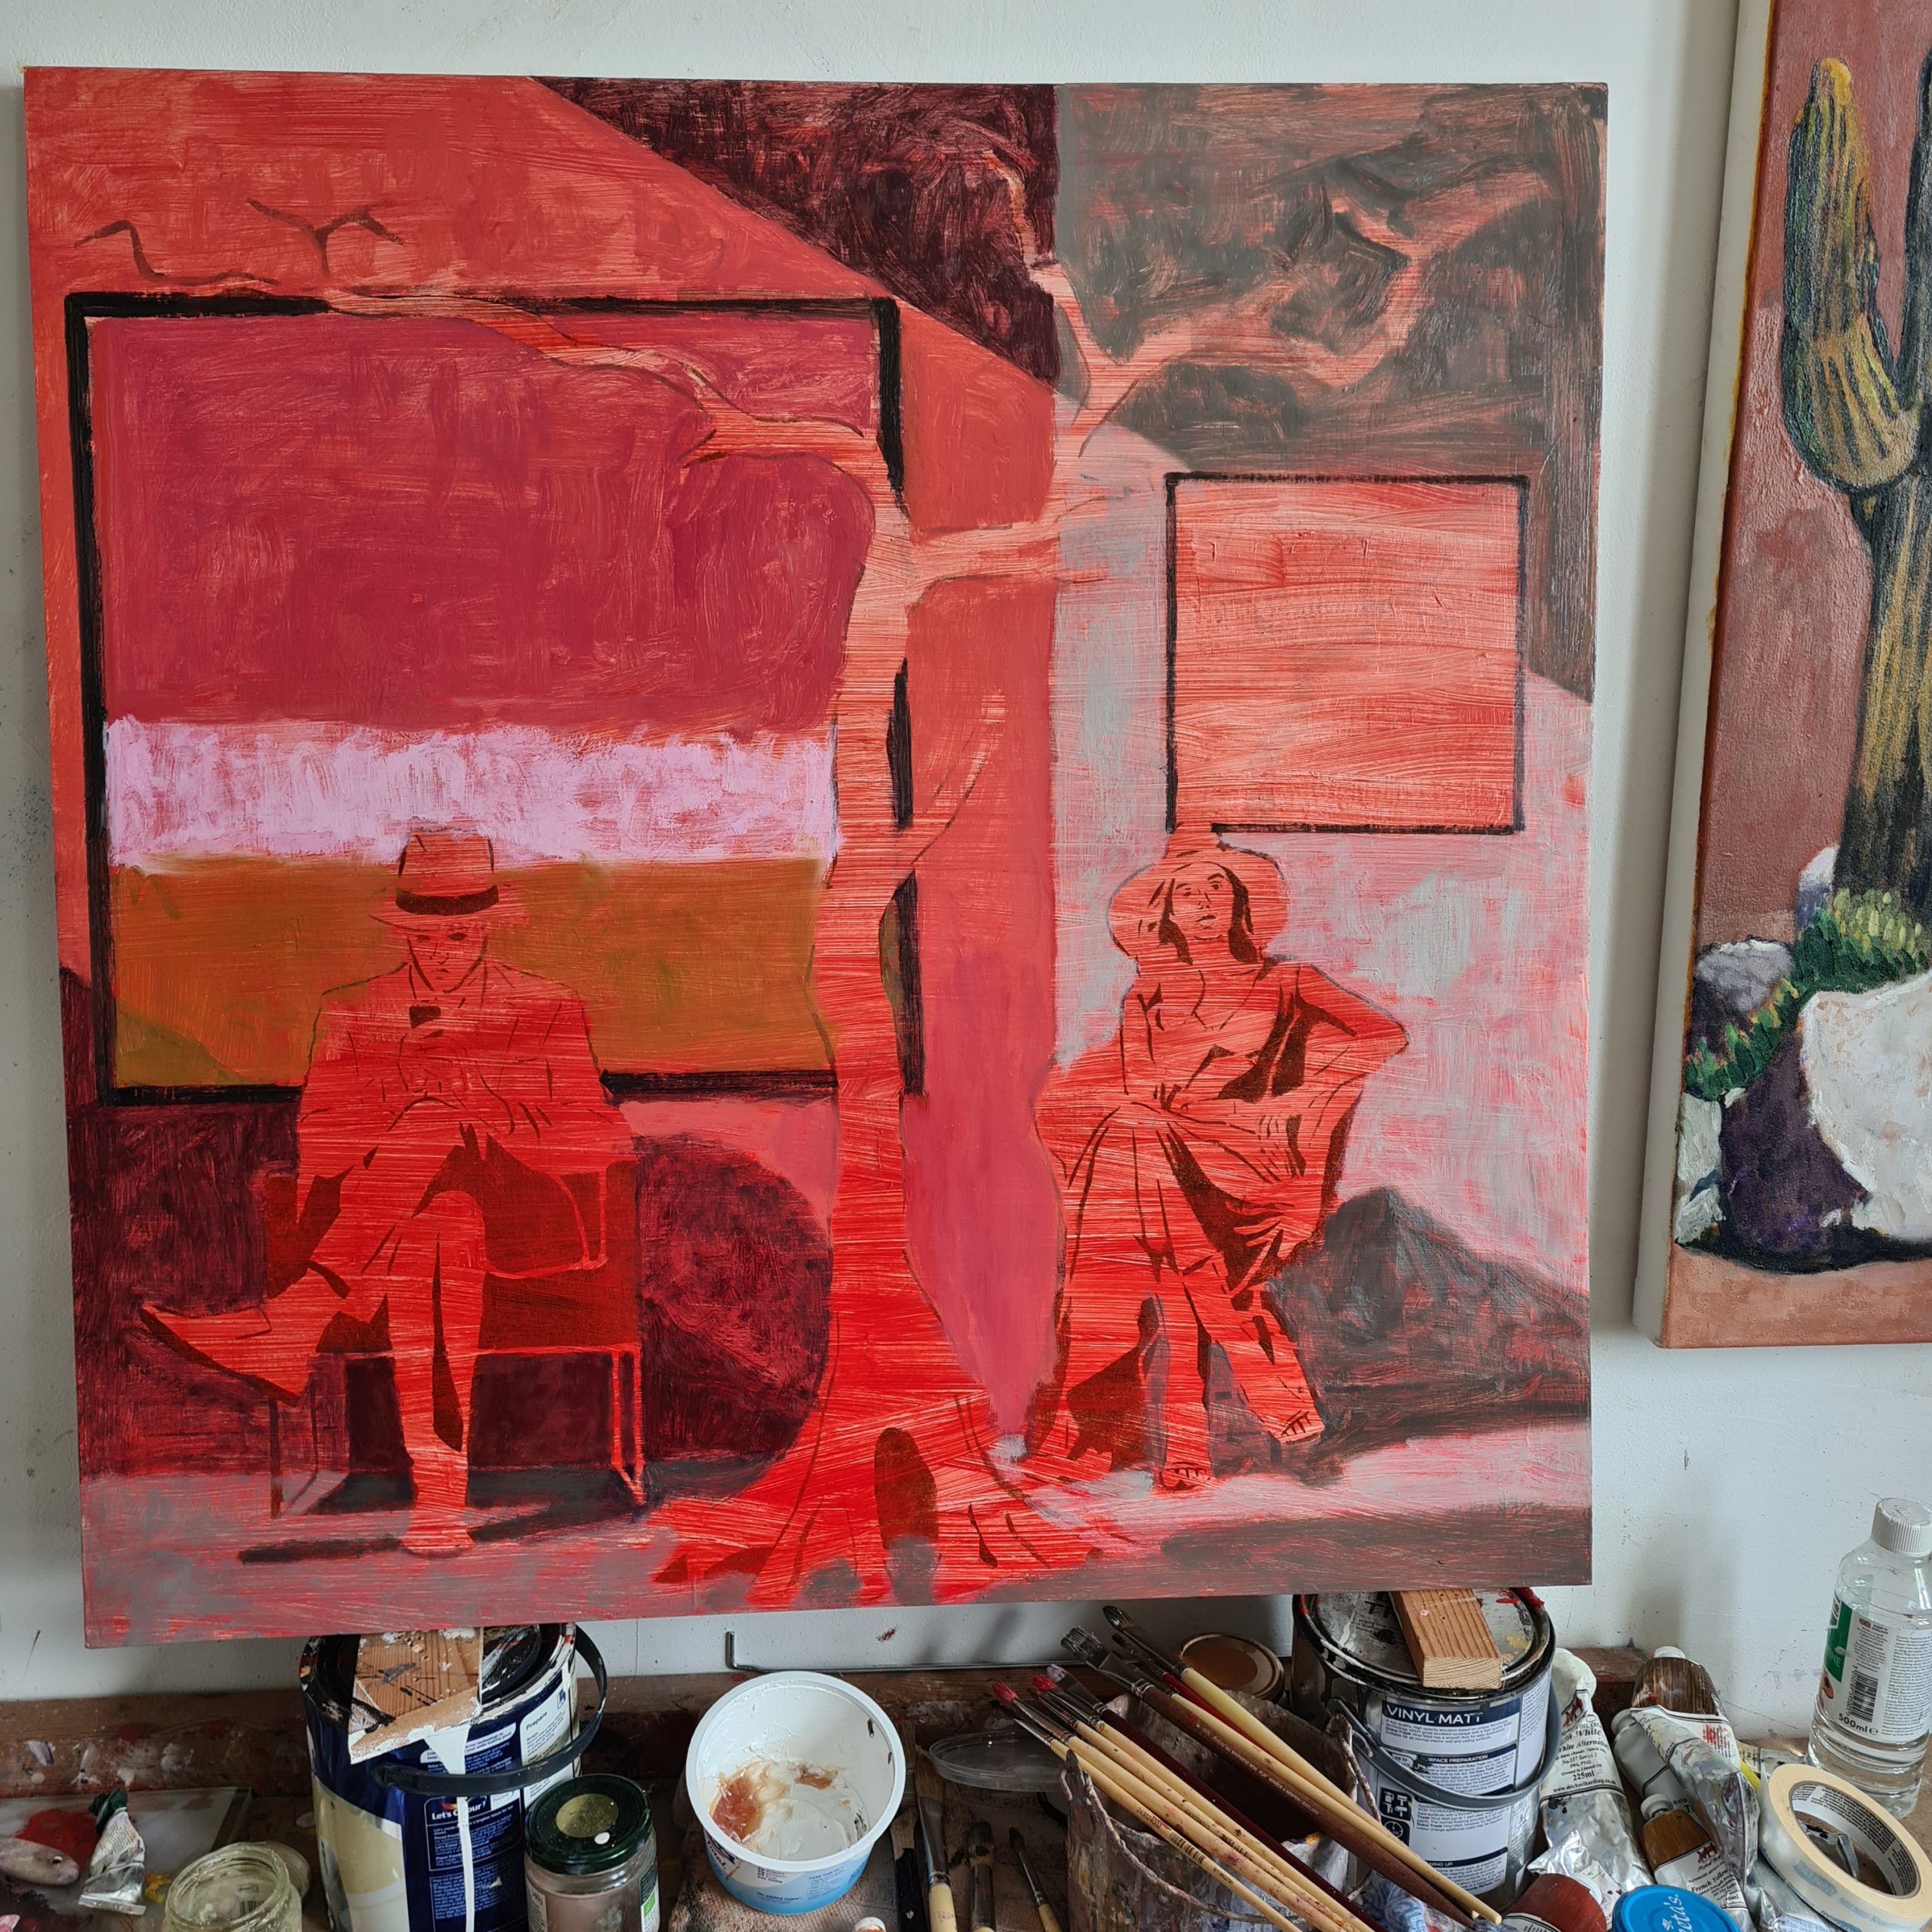 A painting at an early stage of progress by British artist John McSweeney